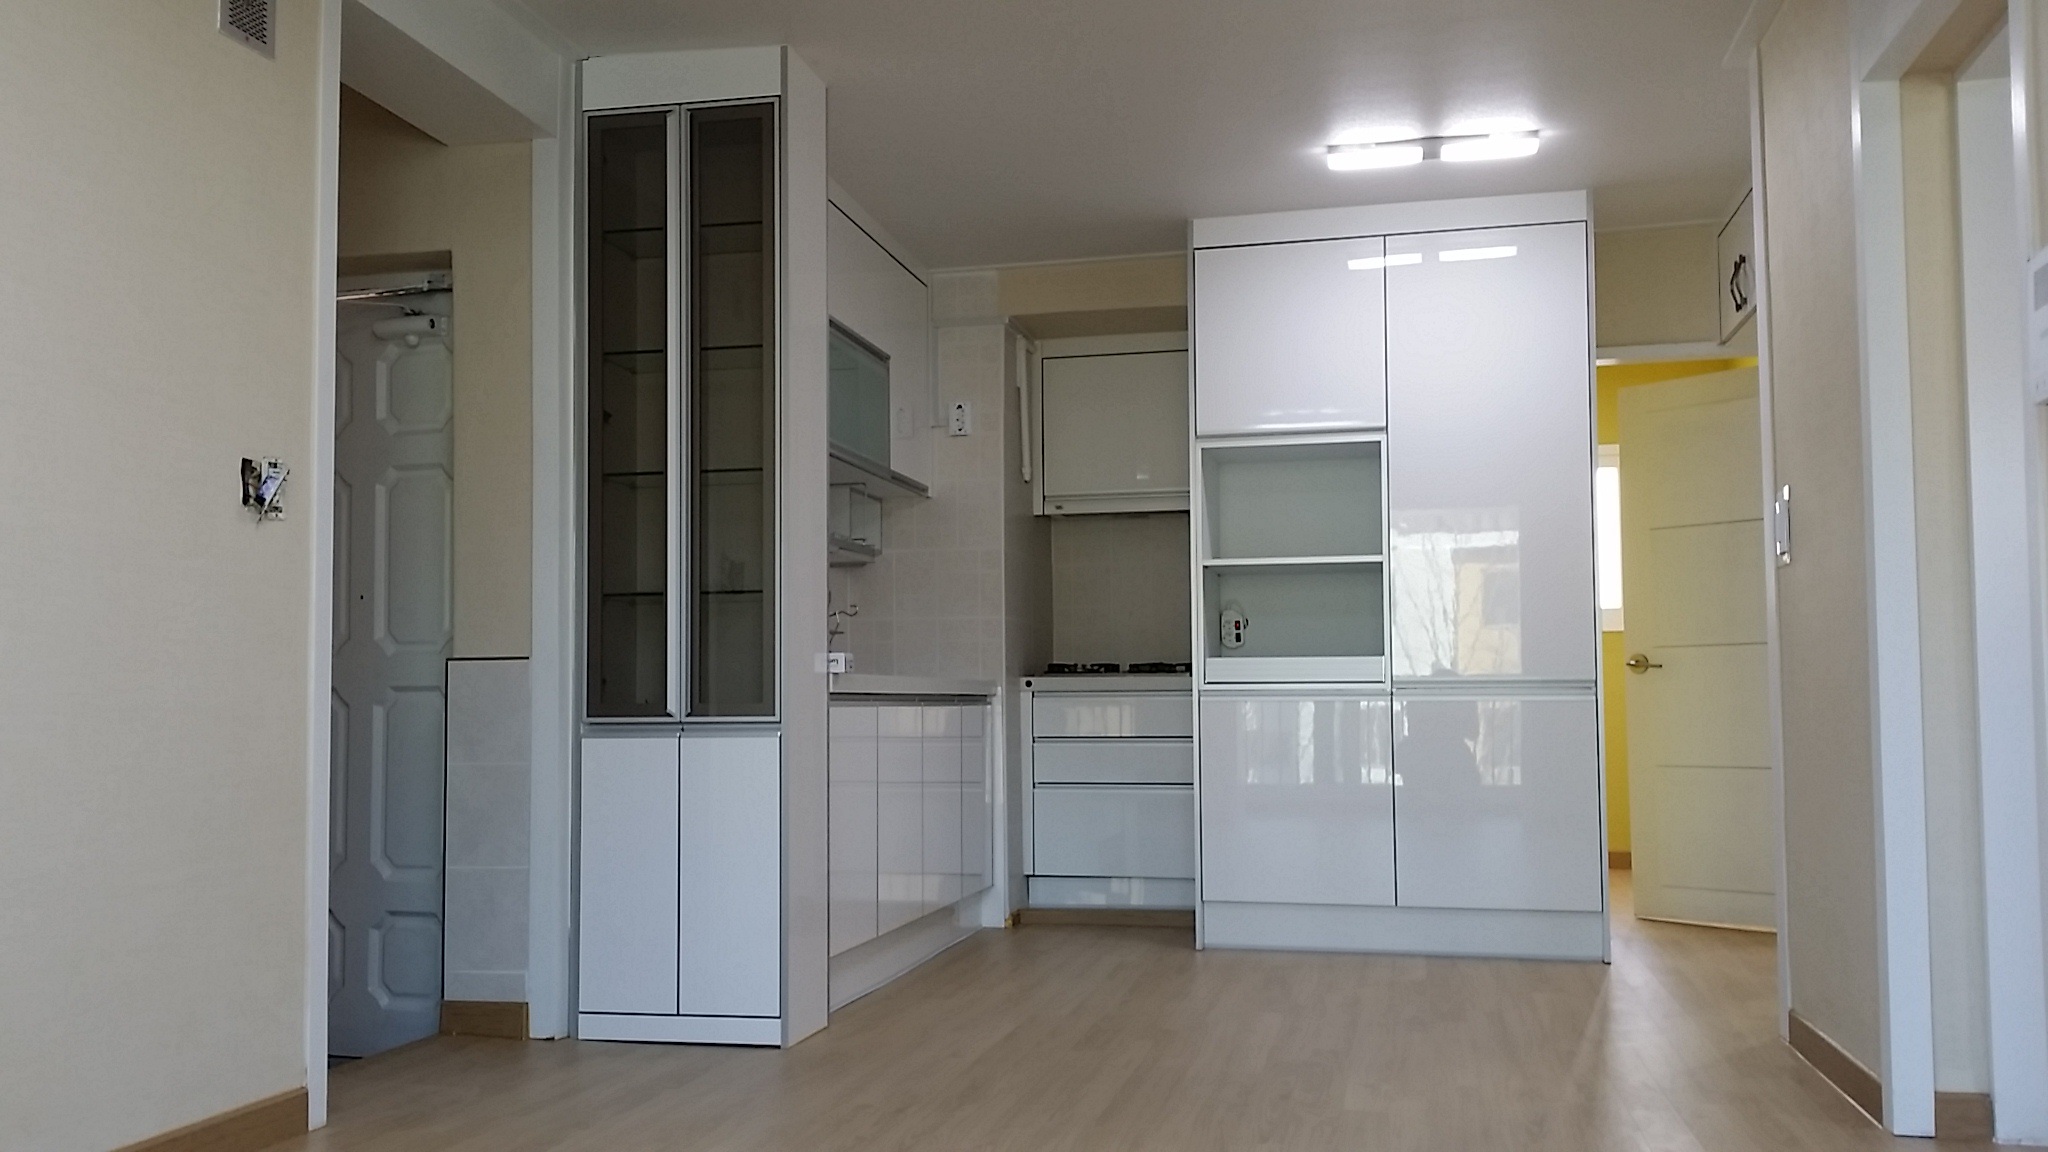 The benefits and disadvantages of a kitchen hutch